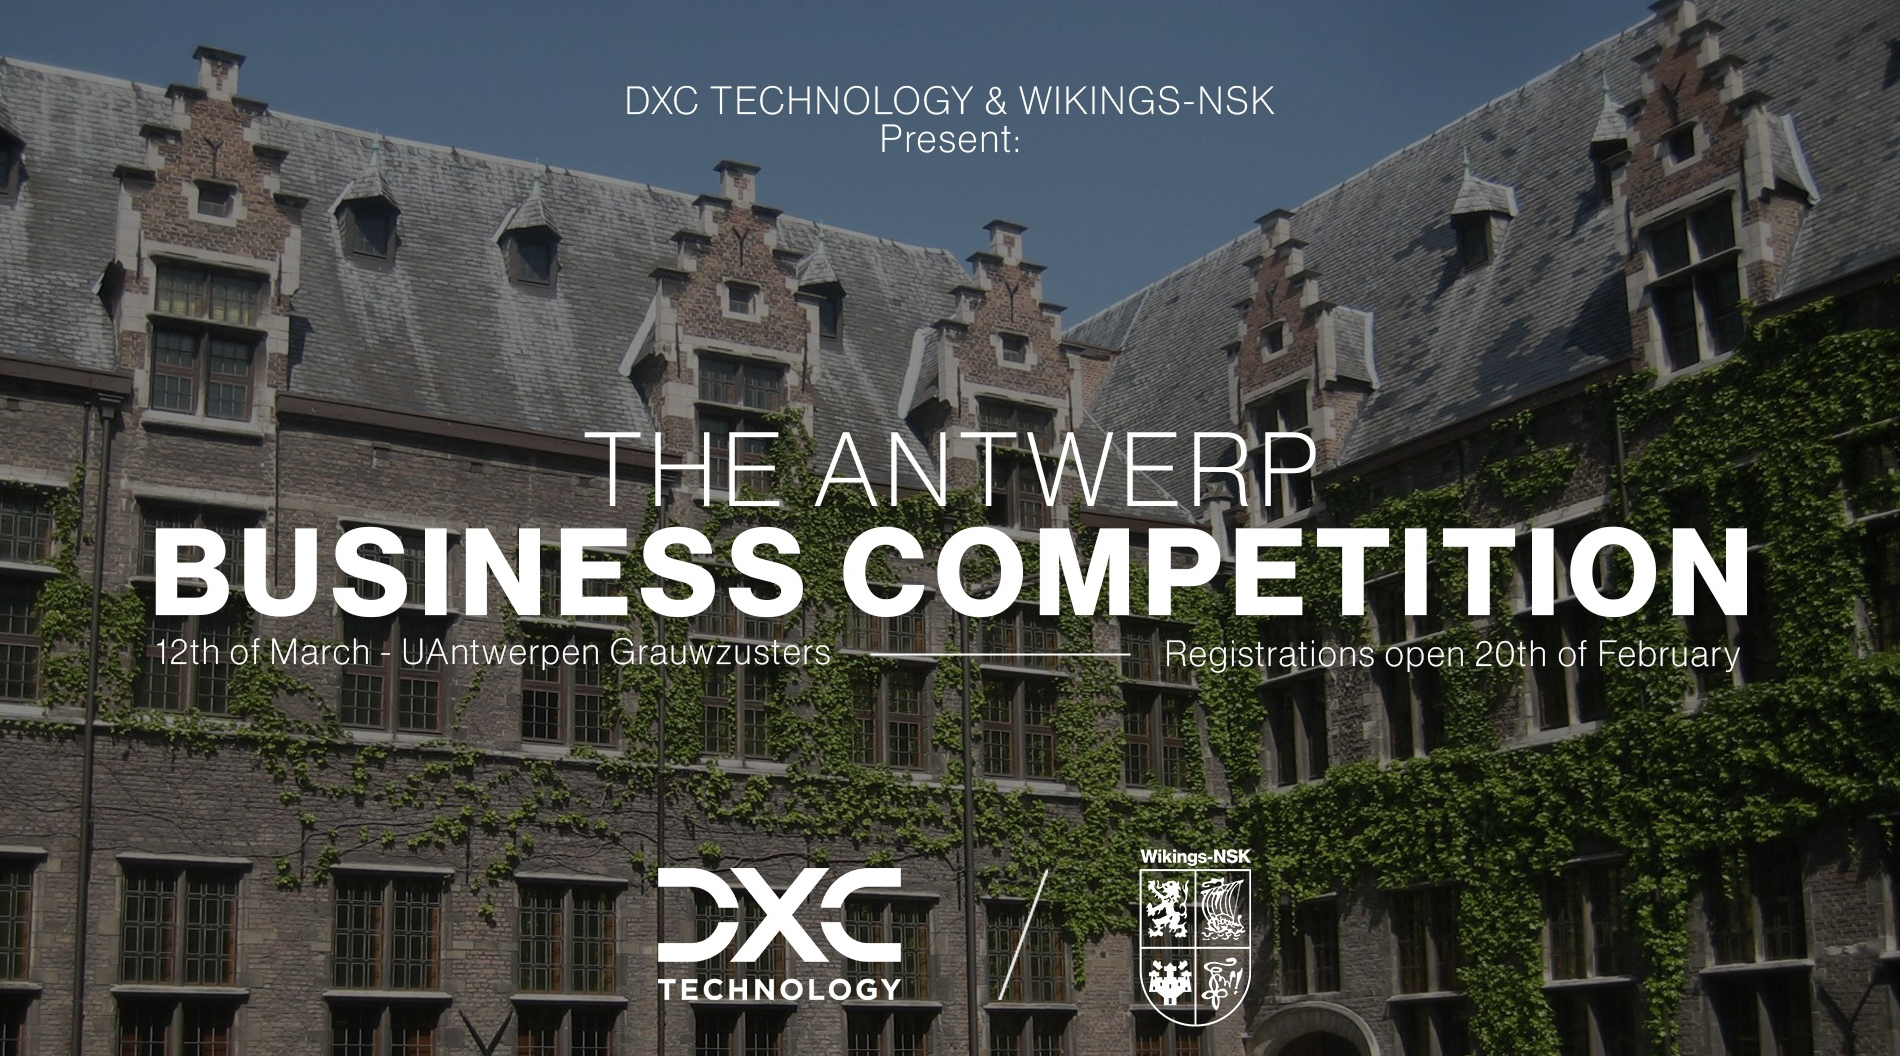 wikings-nsk-the-antwerp-business-competition